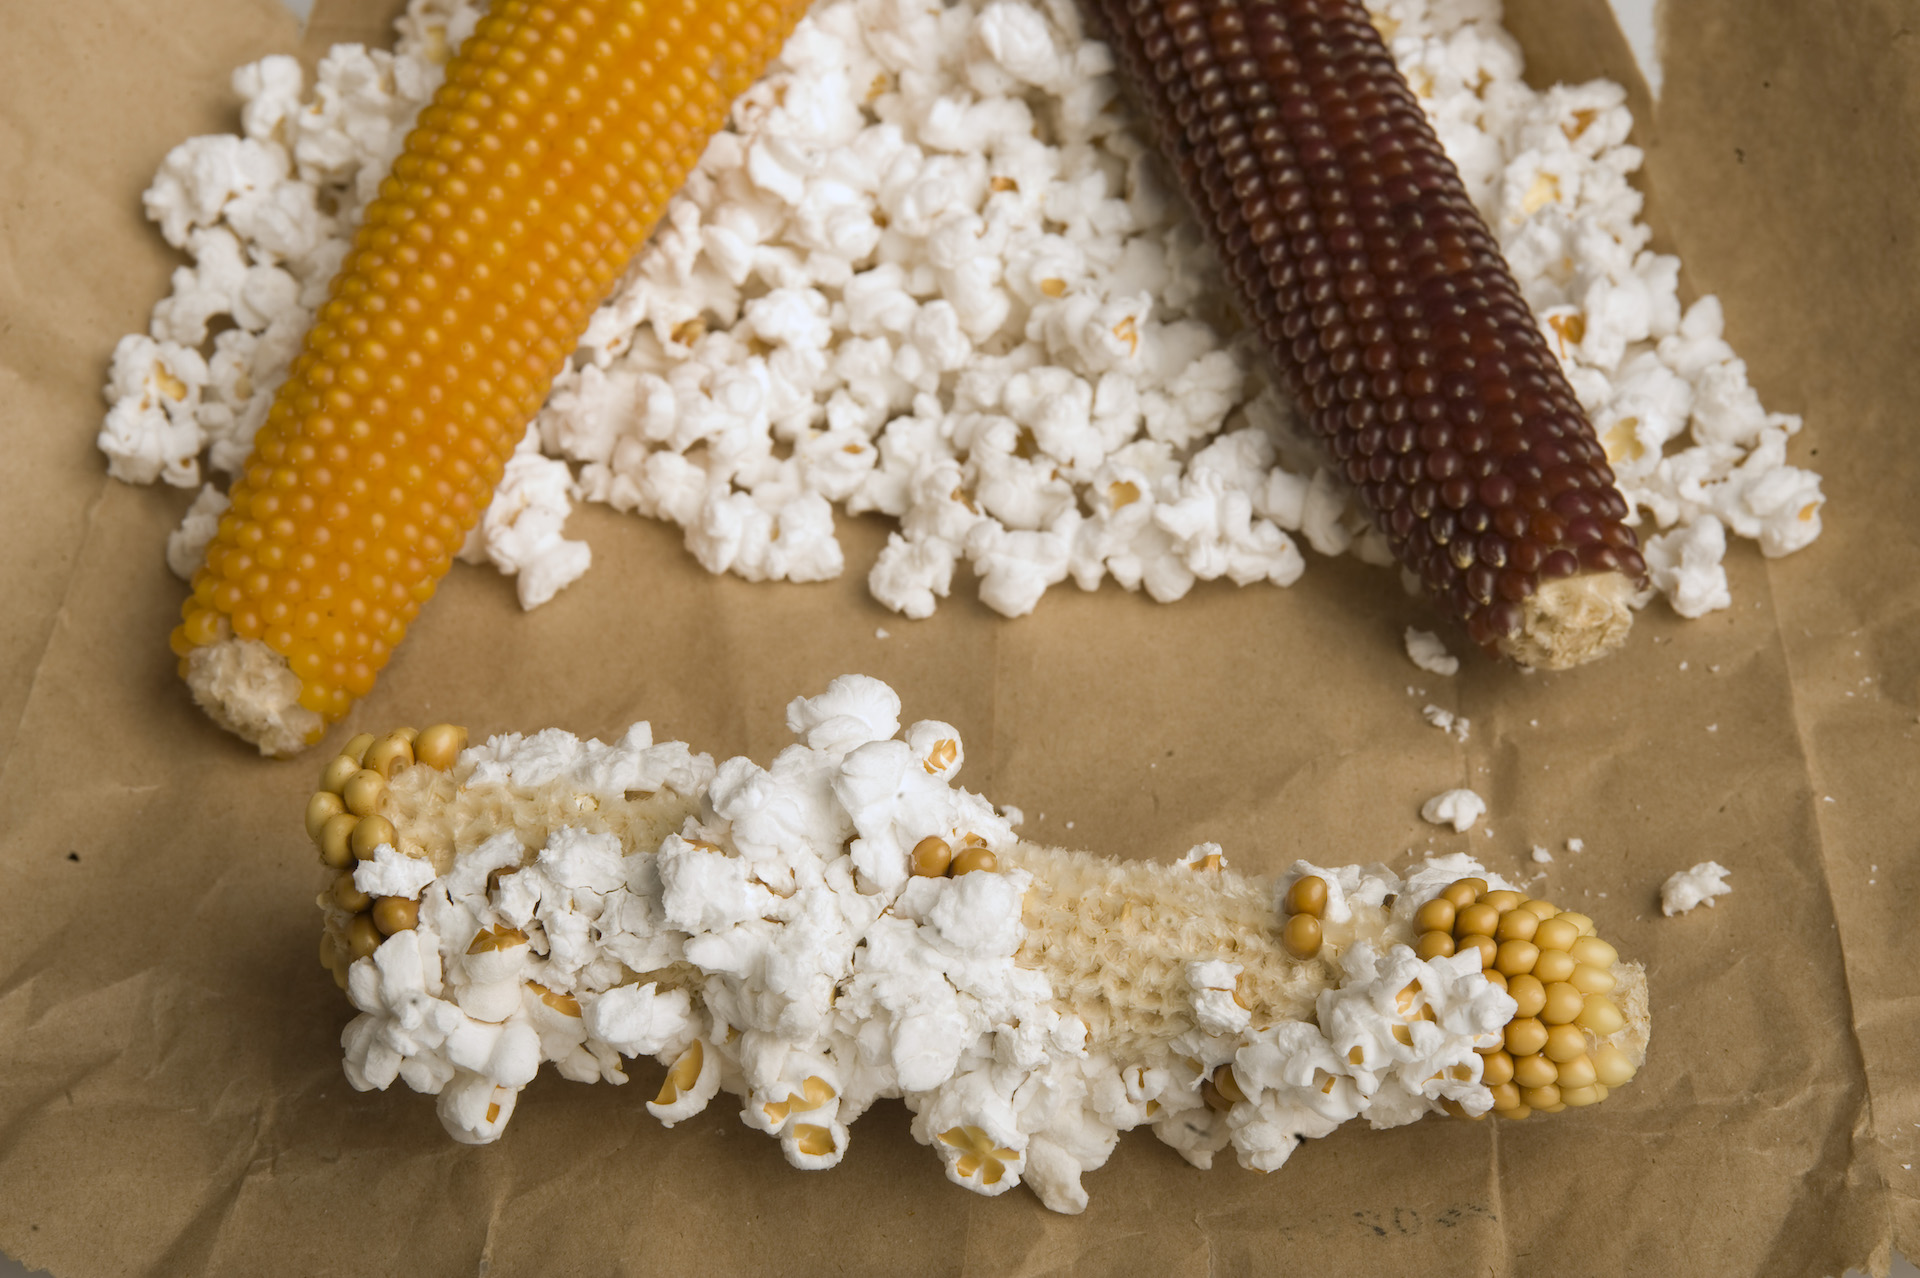 A photo of popcorn being popped on the cob